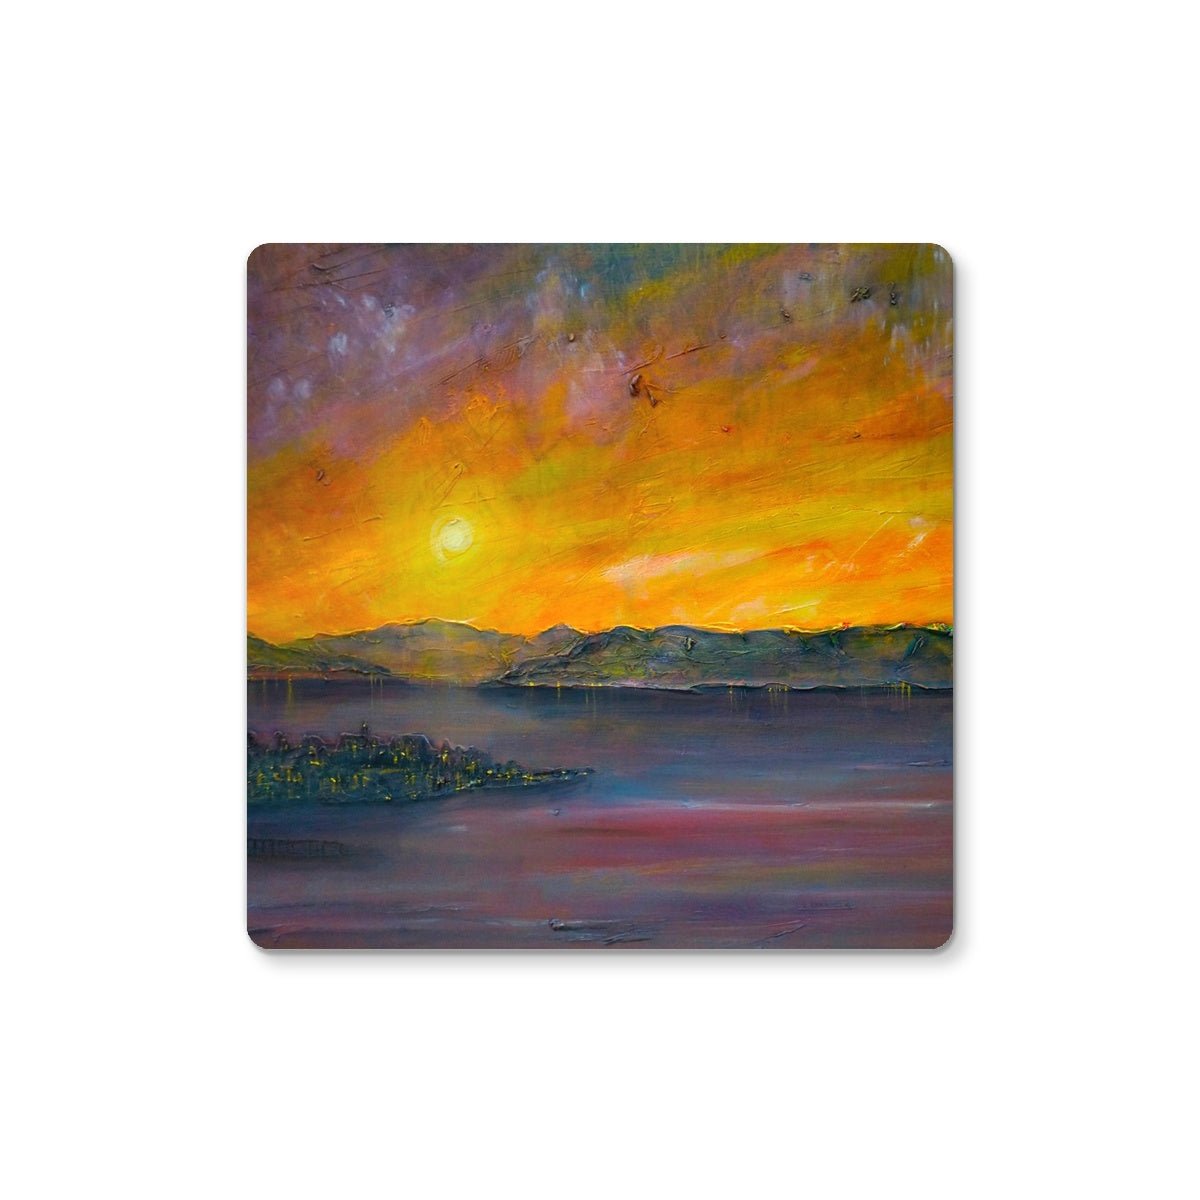 Sunset Over Gourock Art Gifts Coaster-Coasters-River Clyde Art Gallery-2 Coasters-Paintings, Prints, Homeware, Art Gifts From Scotland By Scottish Artist Kevin Hunter